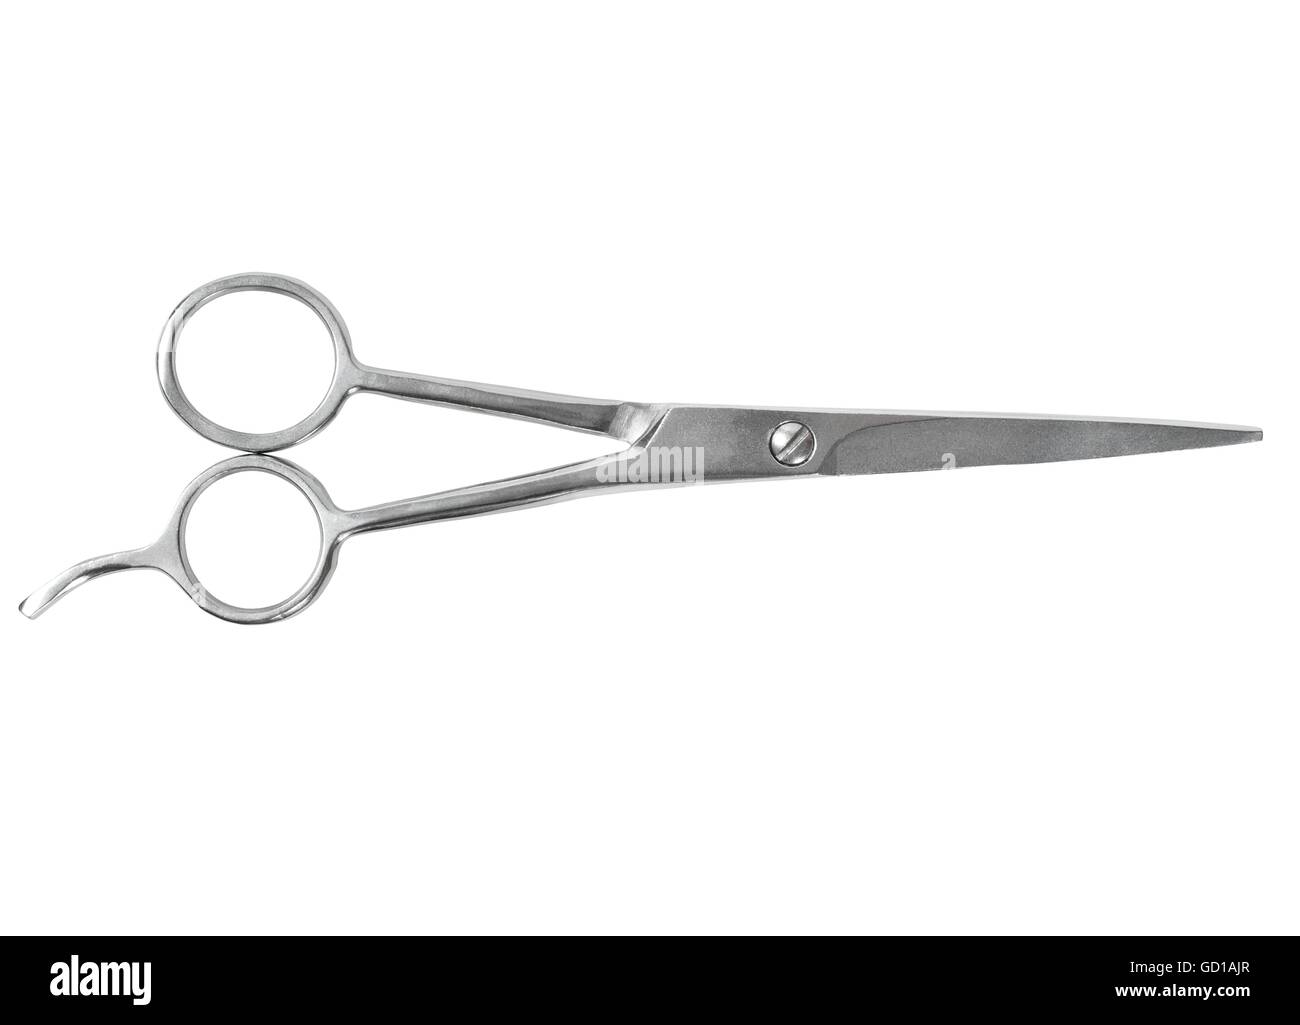 Steel barber scissors isolated on white background Stock Photo